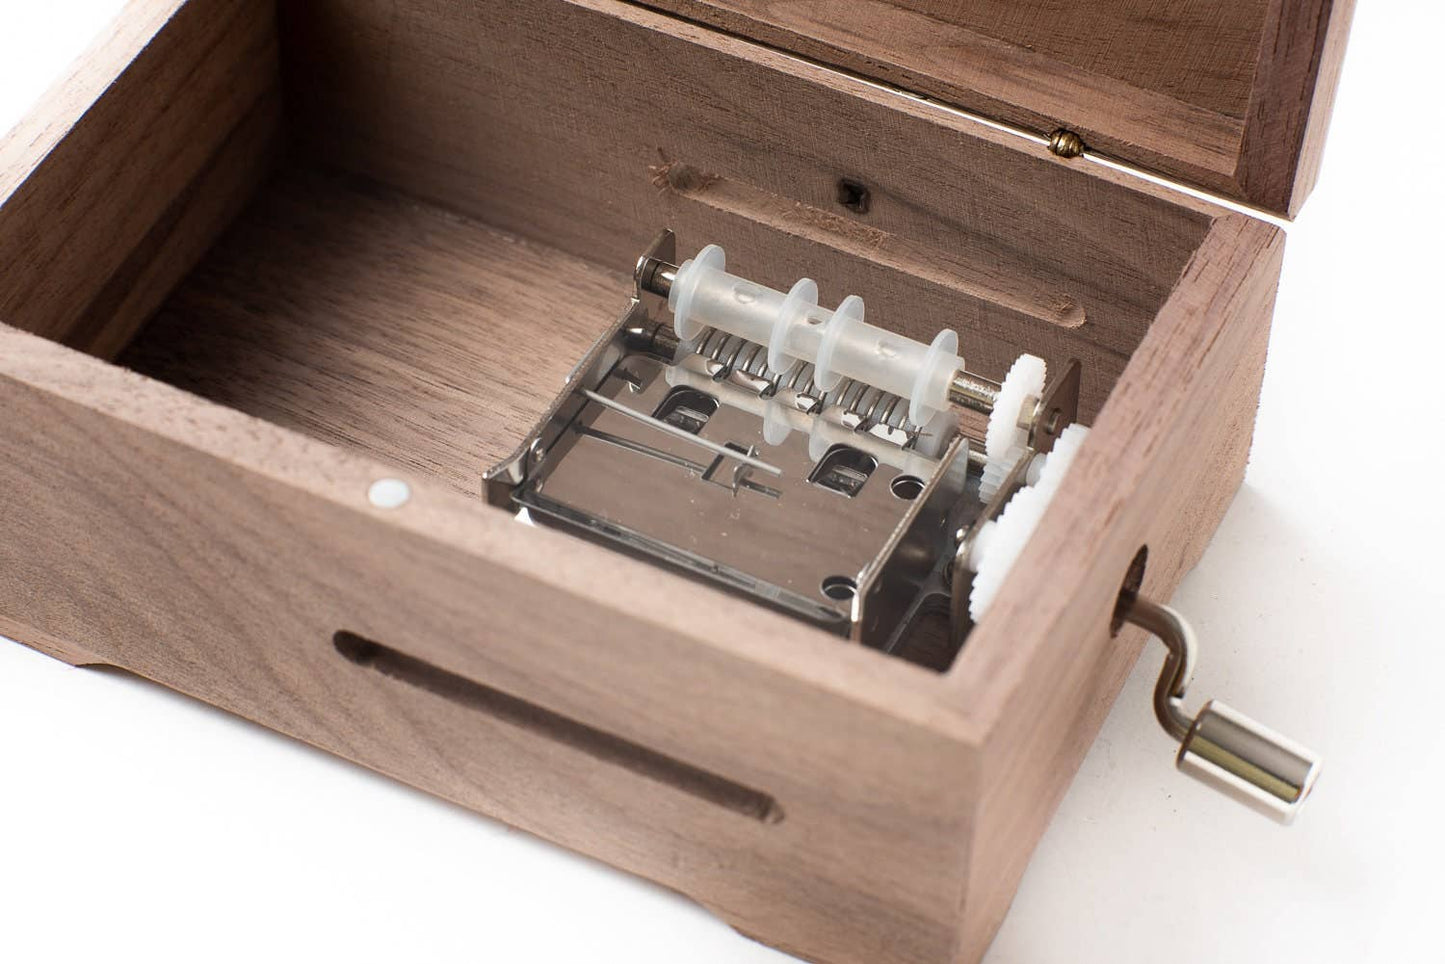 Make Your Own Music Box